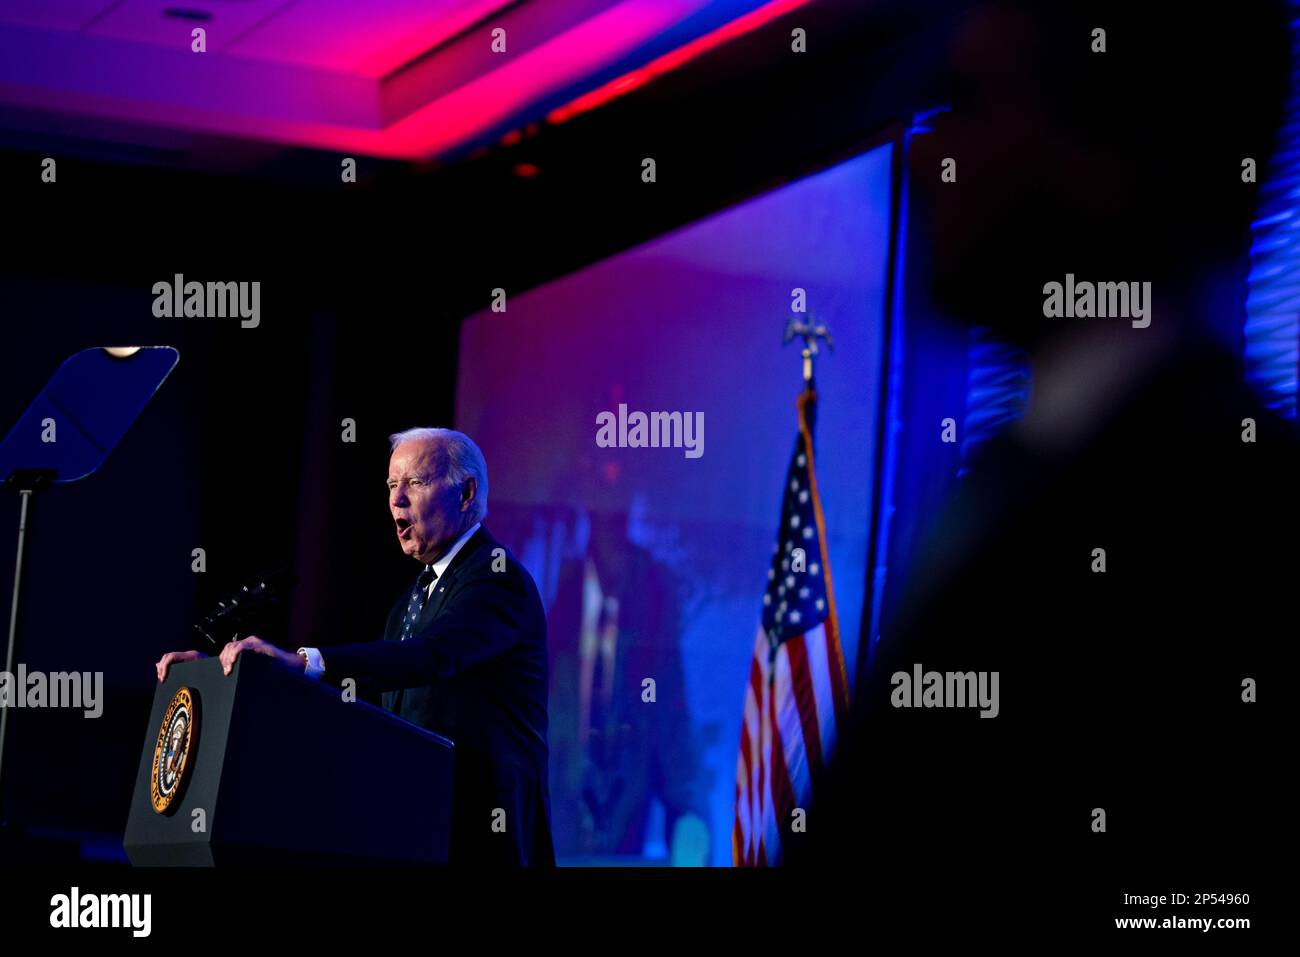 Washington, DC, US, March 6, 2023. United States President Joe Biden speaks at the International Association of Fire Fighters legislative conference in Washington, DC, US, on Monday, March 6, 2023. The Biden administration is nearing completion of an executive order that would restrict investments by US companies in parts of the Chinese economy people familiar with the matter said.Credit: Andrew Harrer/Pool via CNP/MediaPunch Stock Photo